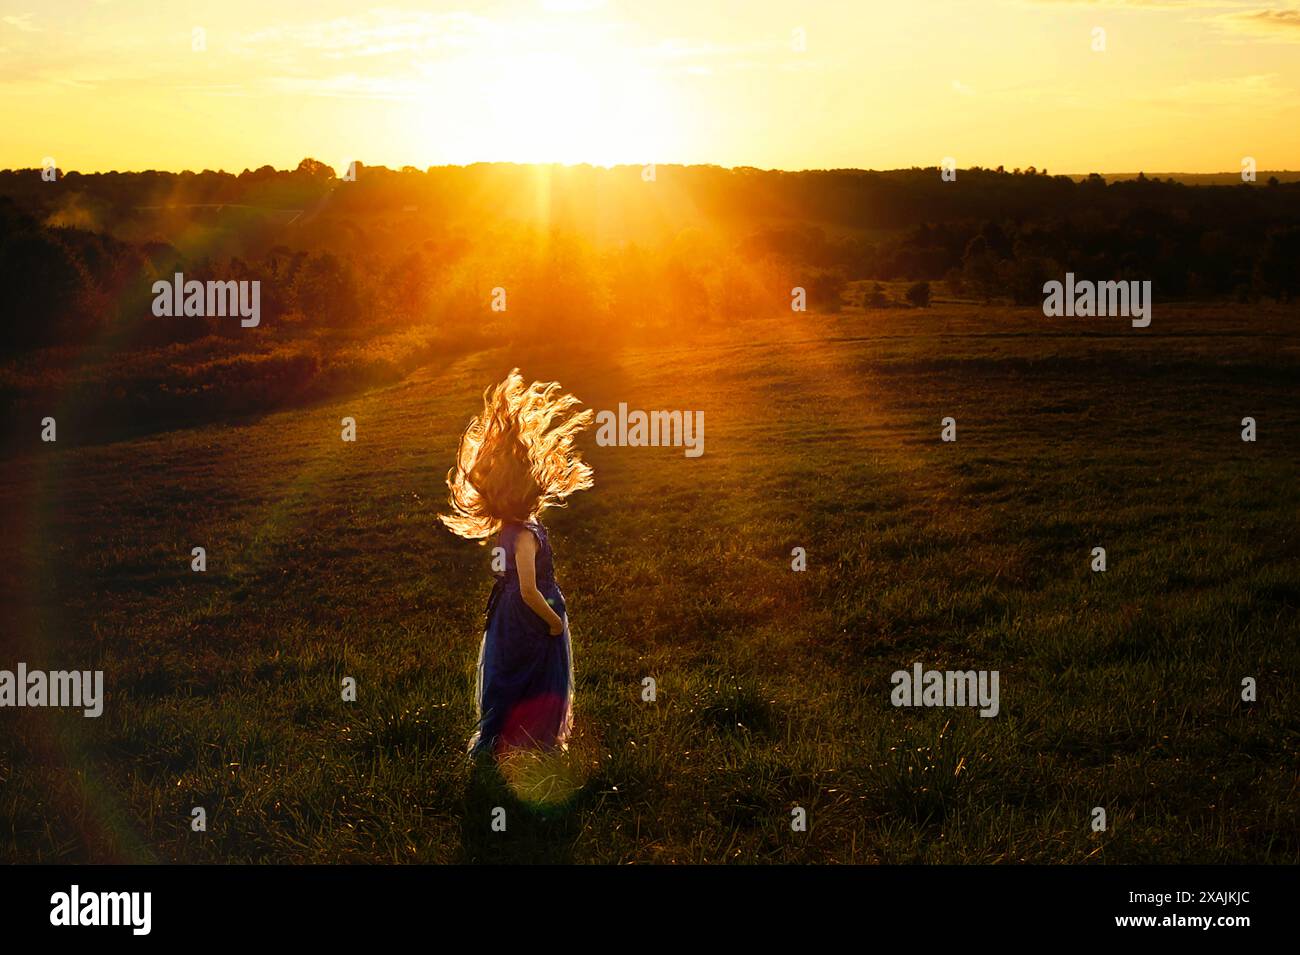 Young girl flipping hair in field at sunset Stock Photo